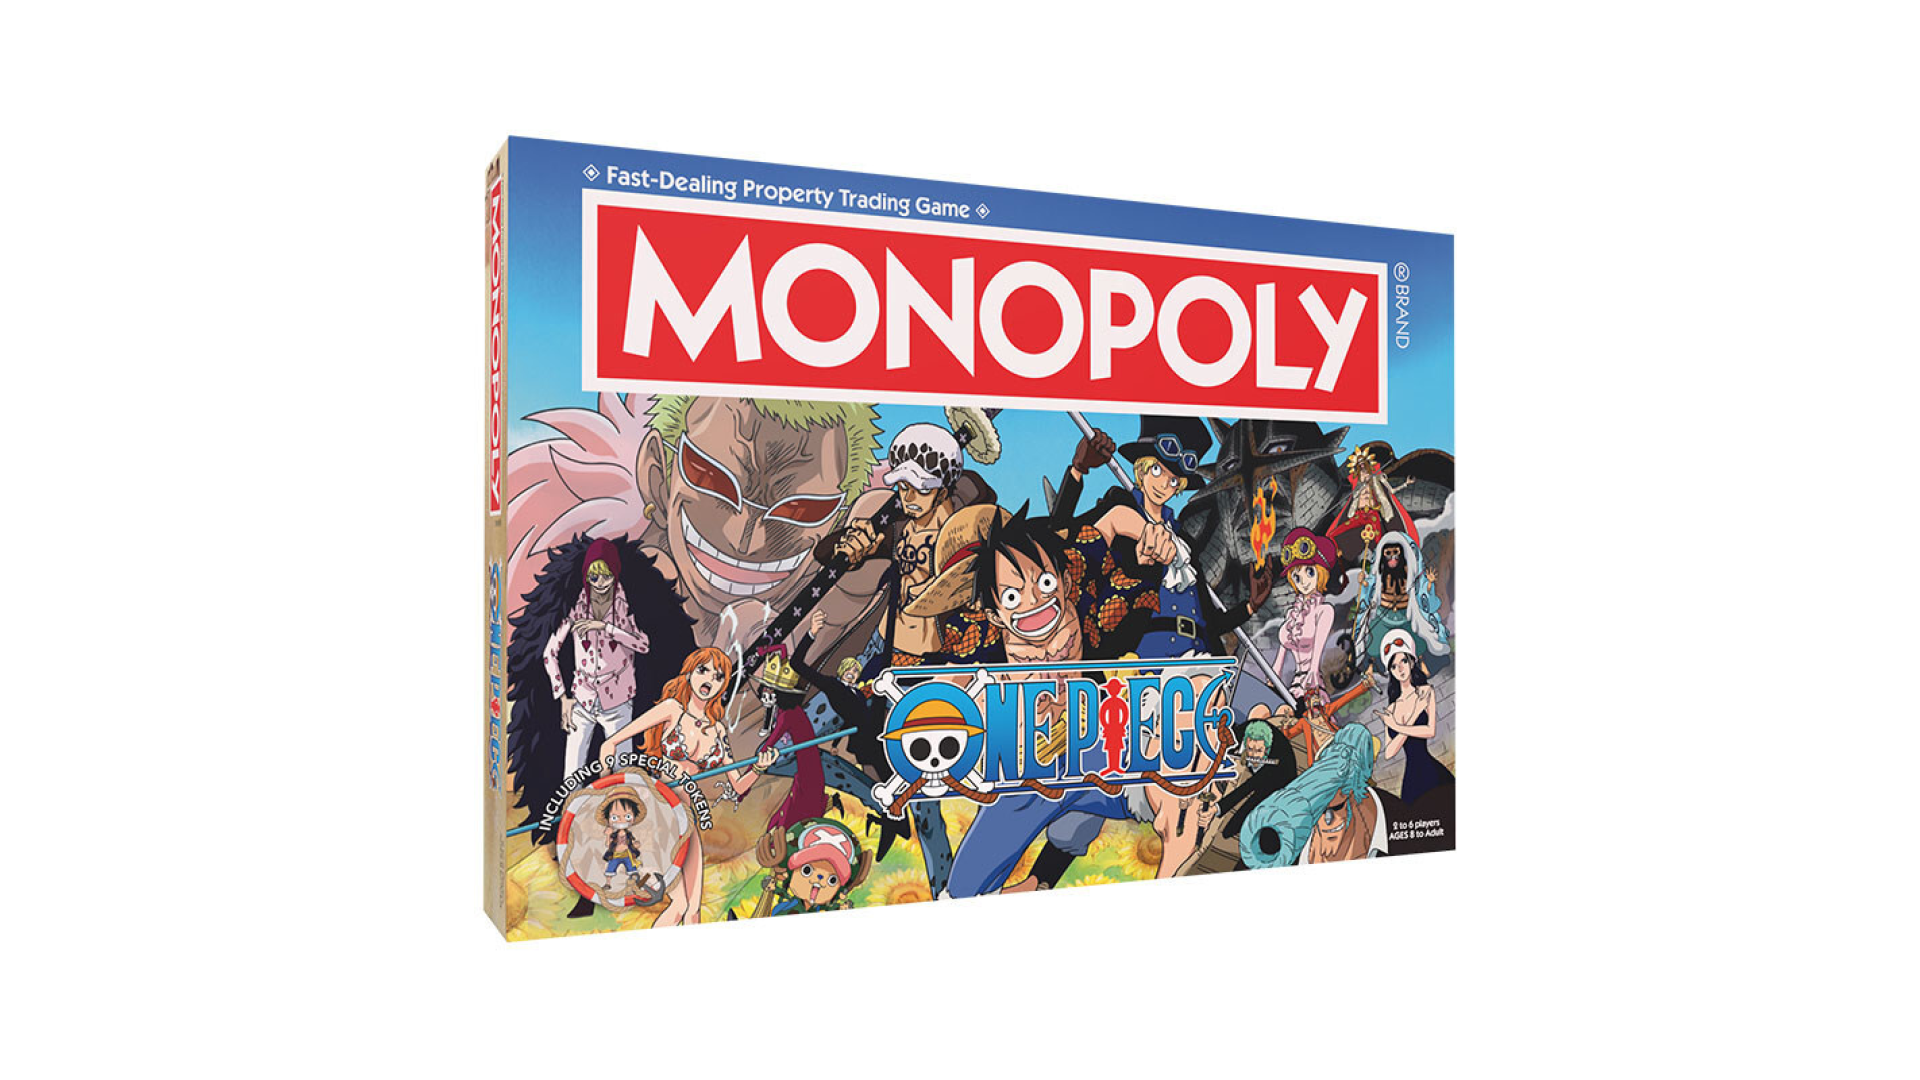 The Op Games Launches MONOPOLY: 'One Piece' Edition